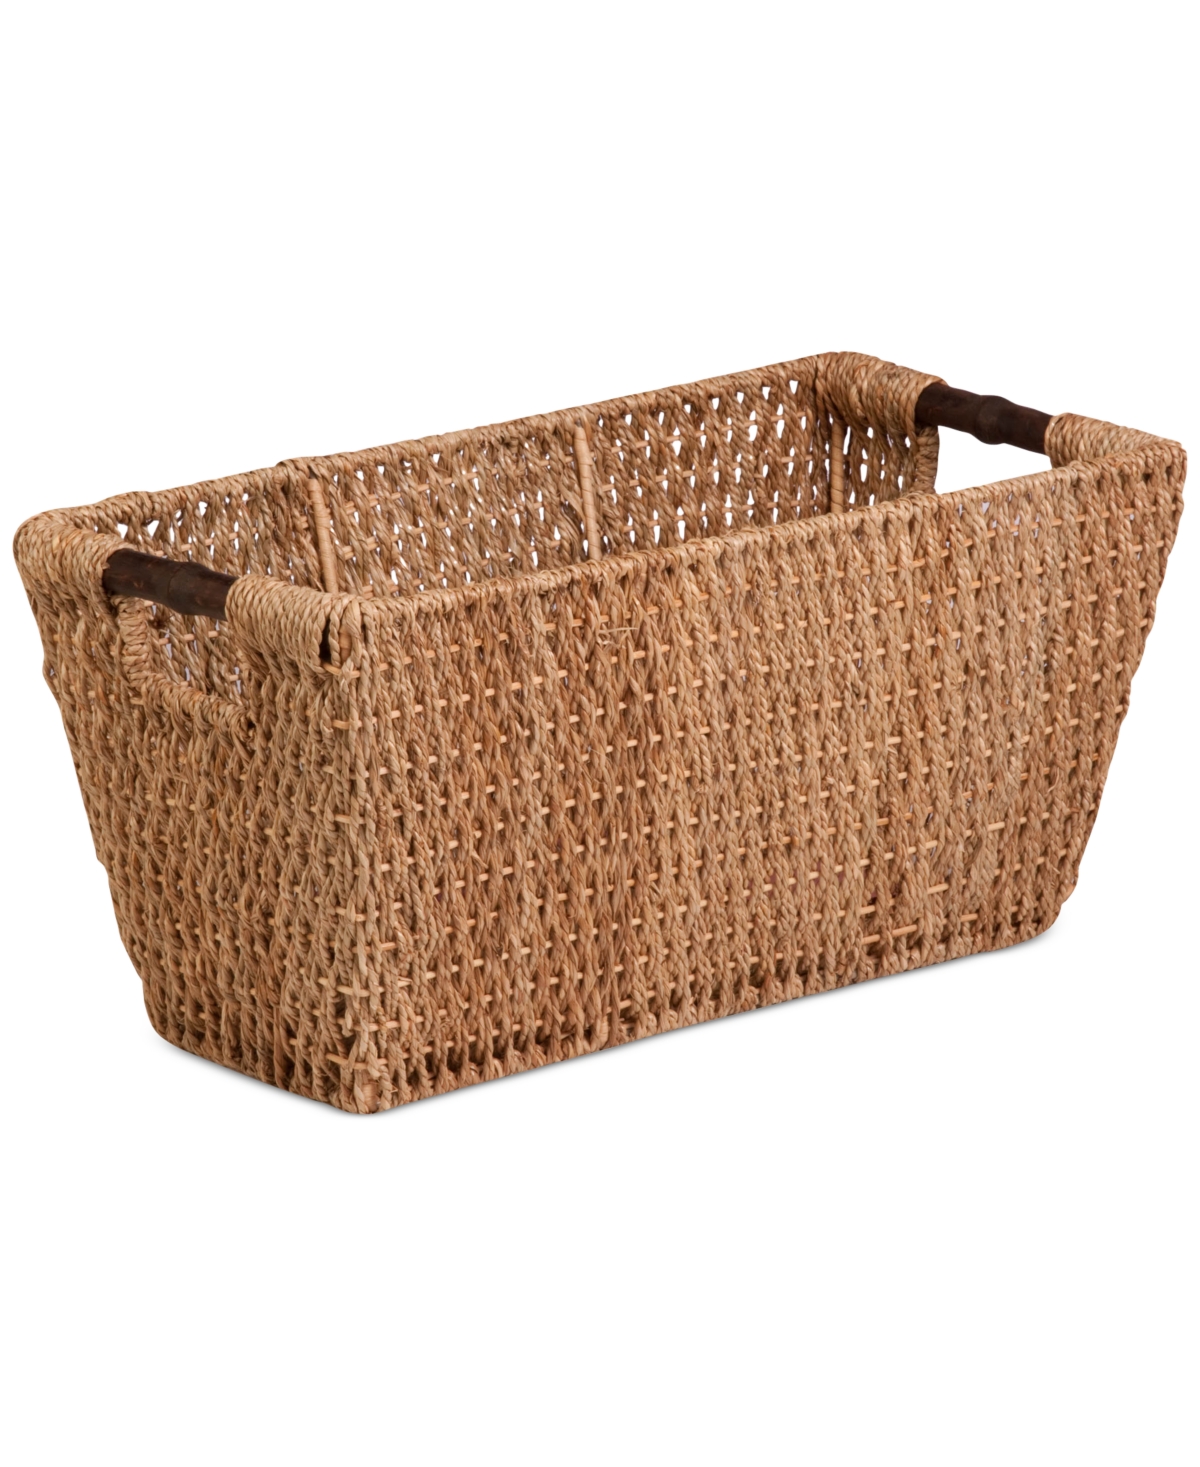 Large Seagrass Basket with Handles - Natural